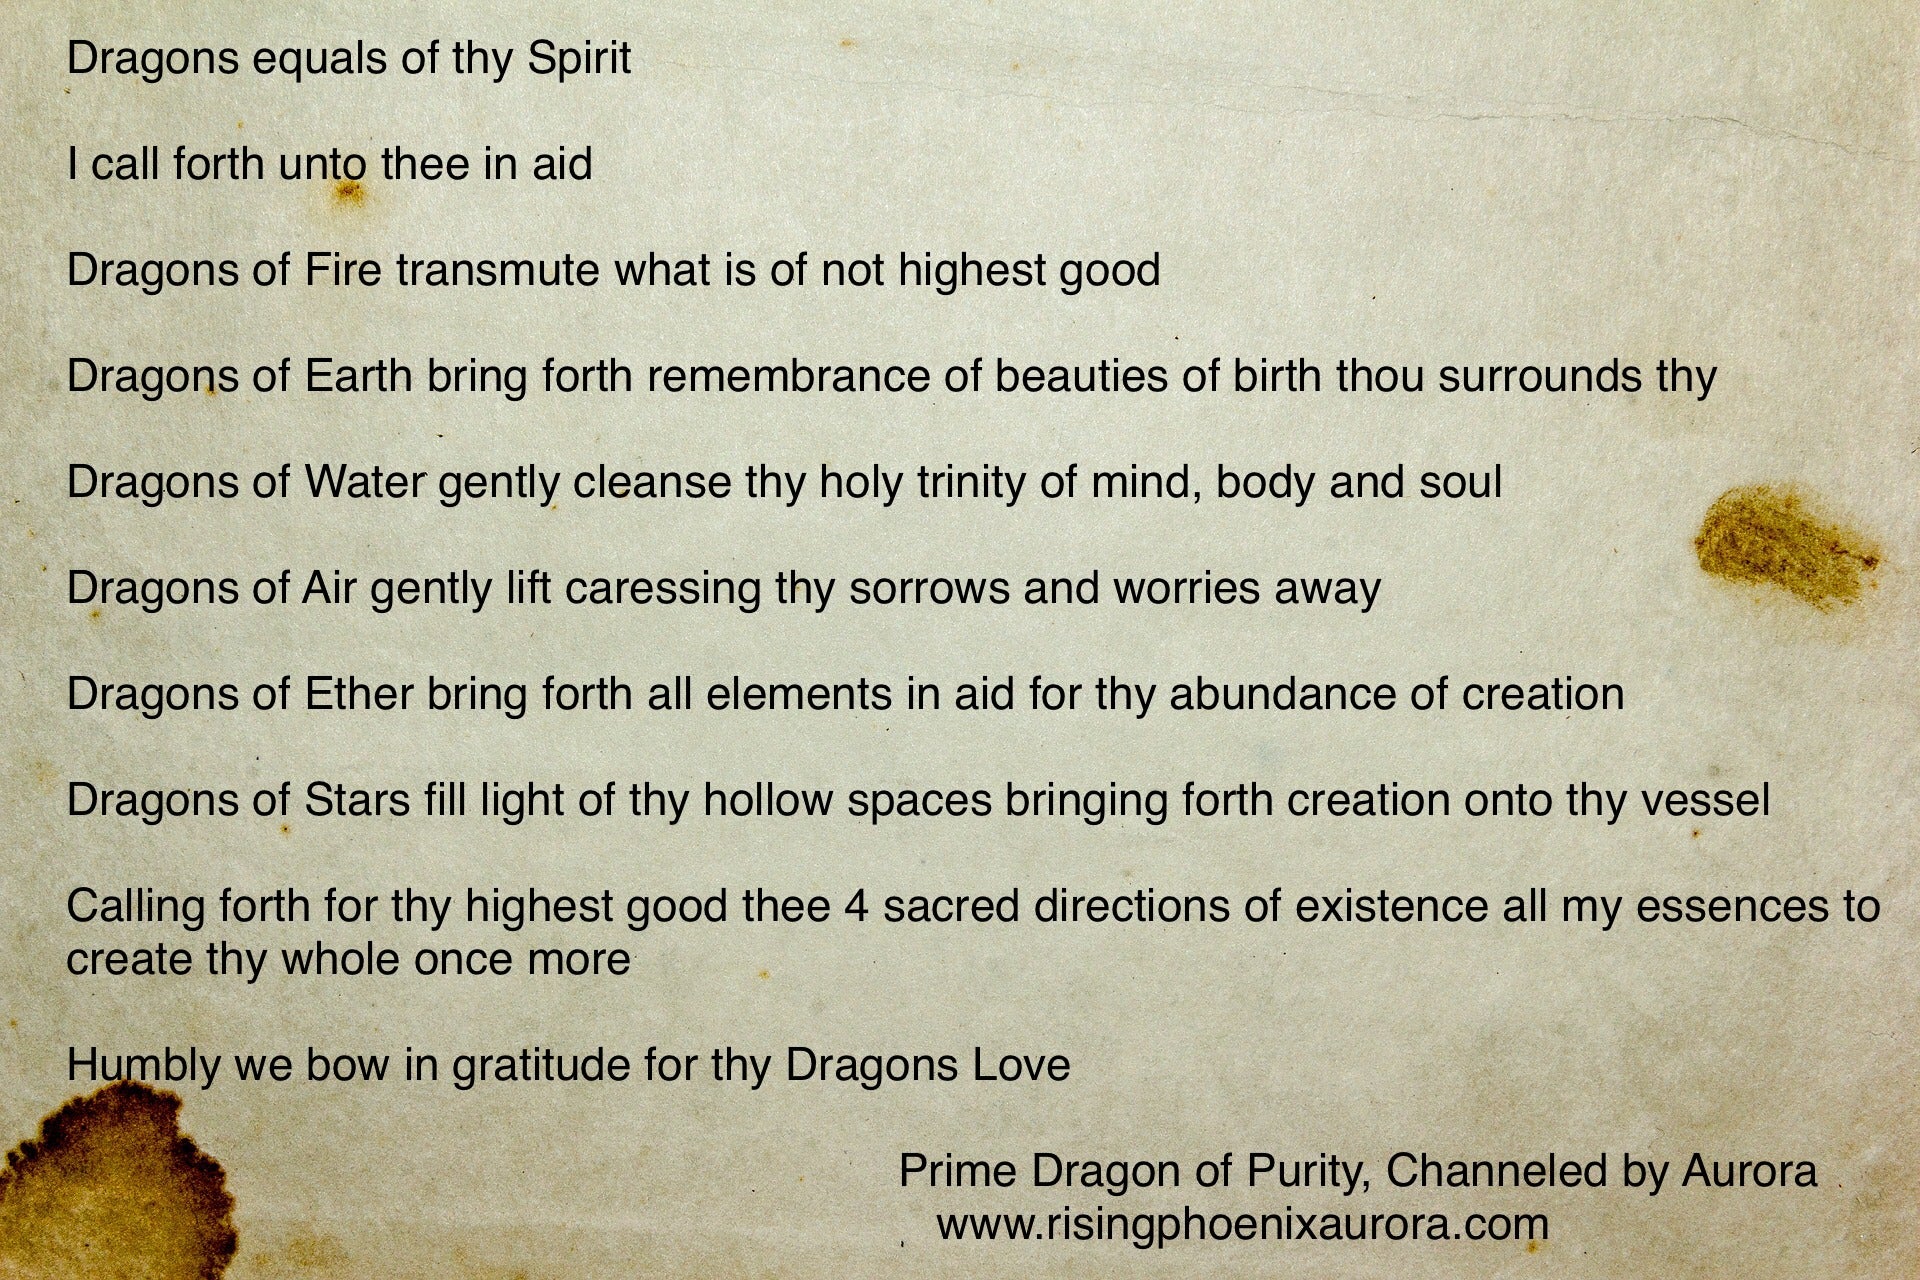 Prime Dragon of Purity